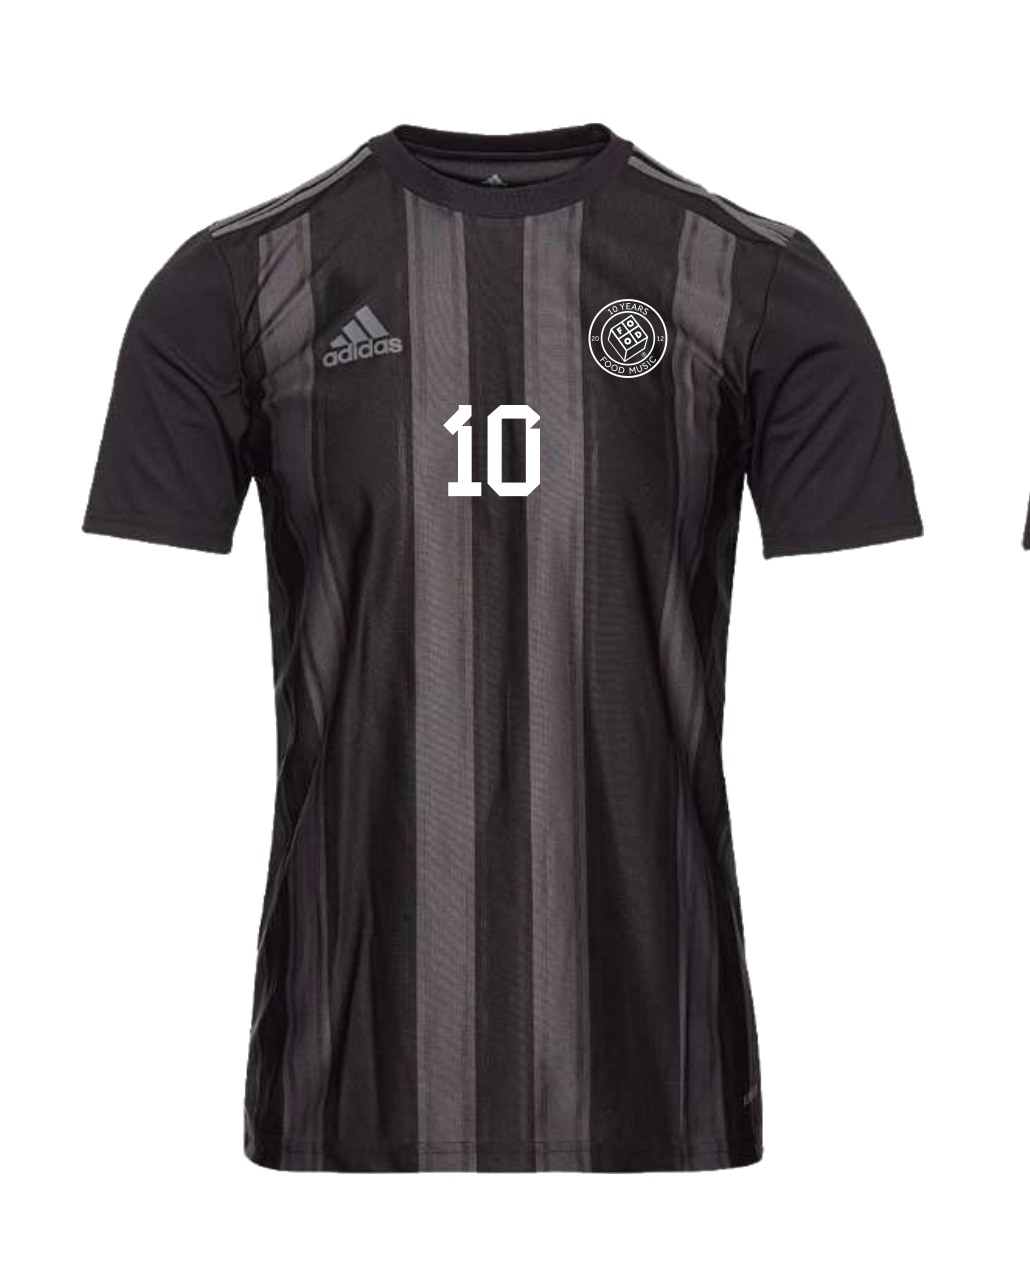 Top 10 Soccer Jerseys of the Decade